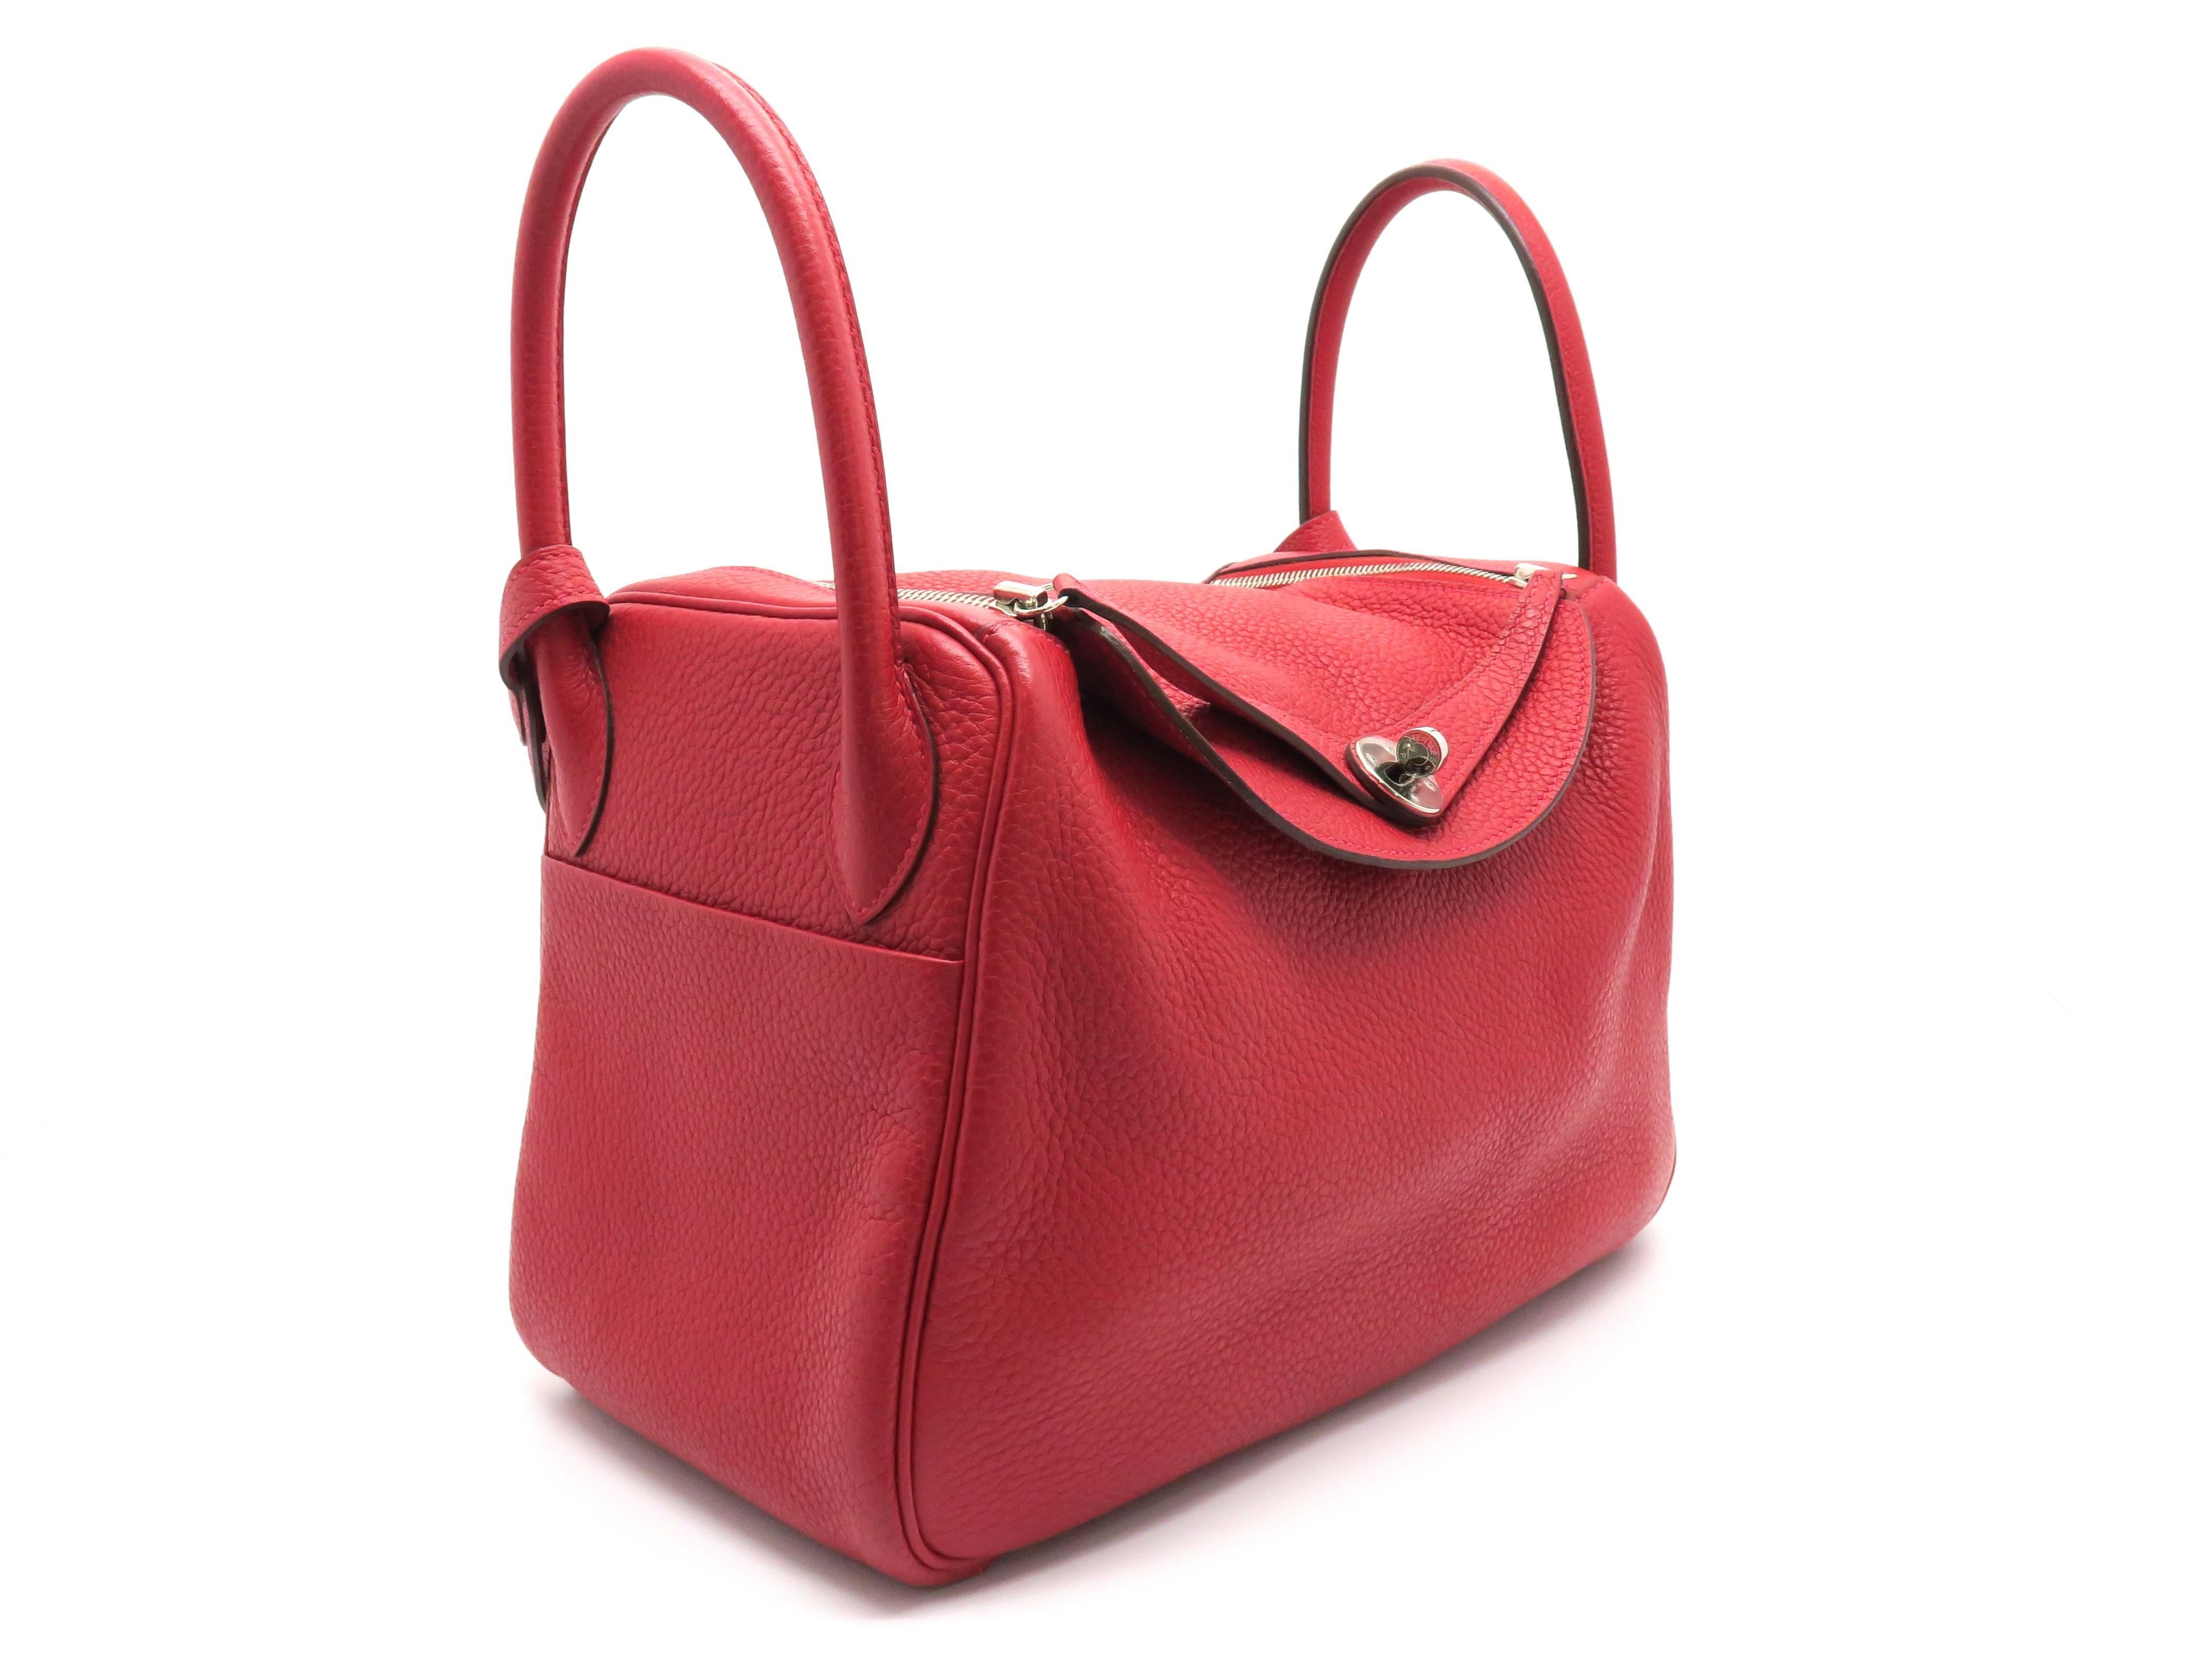 Color: Rouge Garance (designer color)

Material: Taurillon Clemence Leather

Condition: Rank A
Overall: Good, few minor defects.
Surface: Good
Corners: Good
Edges: Good
Handles/Strap: Minor Scratches
Hardware: Good

Dimensions: